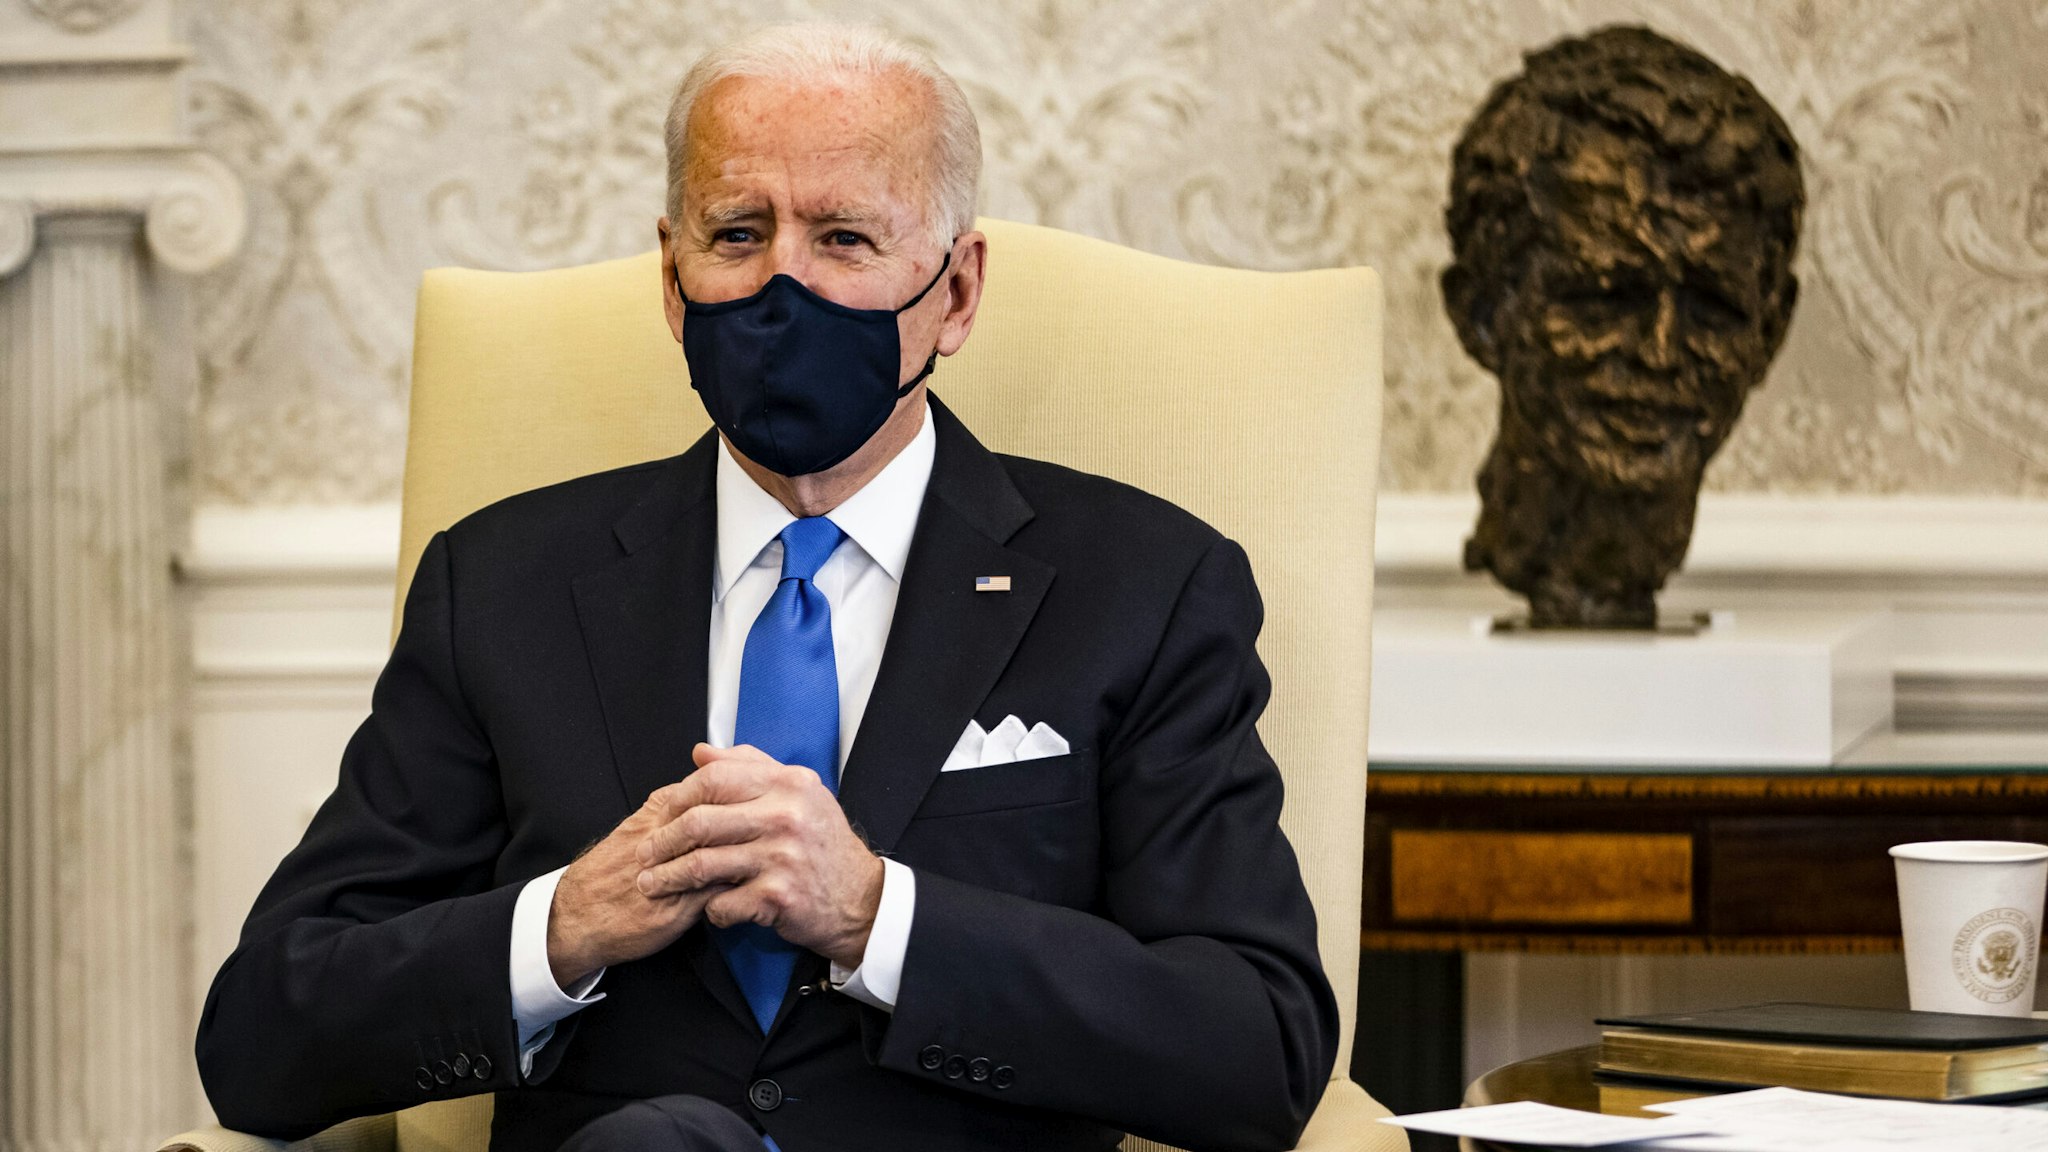 WASHINGTON, DC - MARCH 03: President Joe Biden holds a meeting on cancer with Vice President Kamala Harris and other lawmakers in the Oval Office at the White House on March 3, 2021 in Washington, DC.